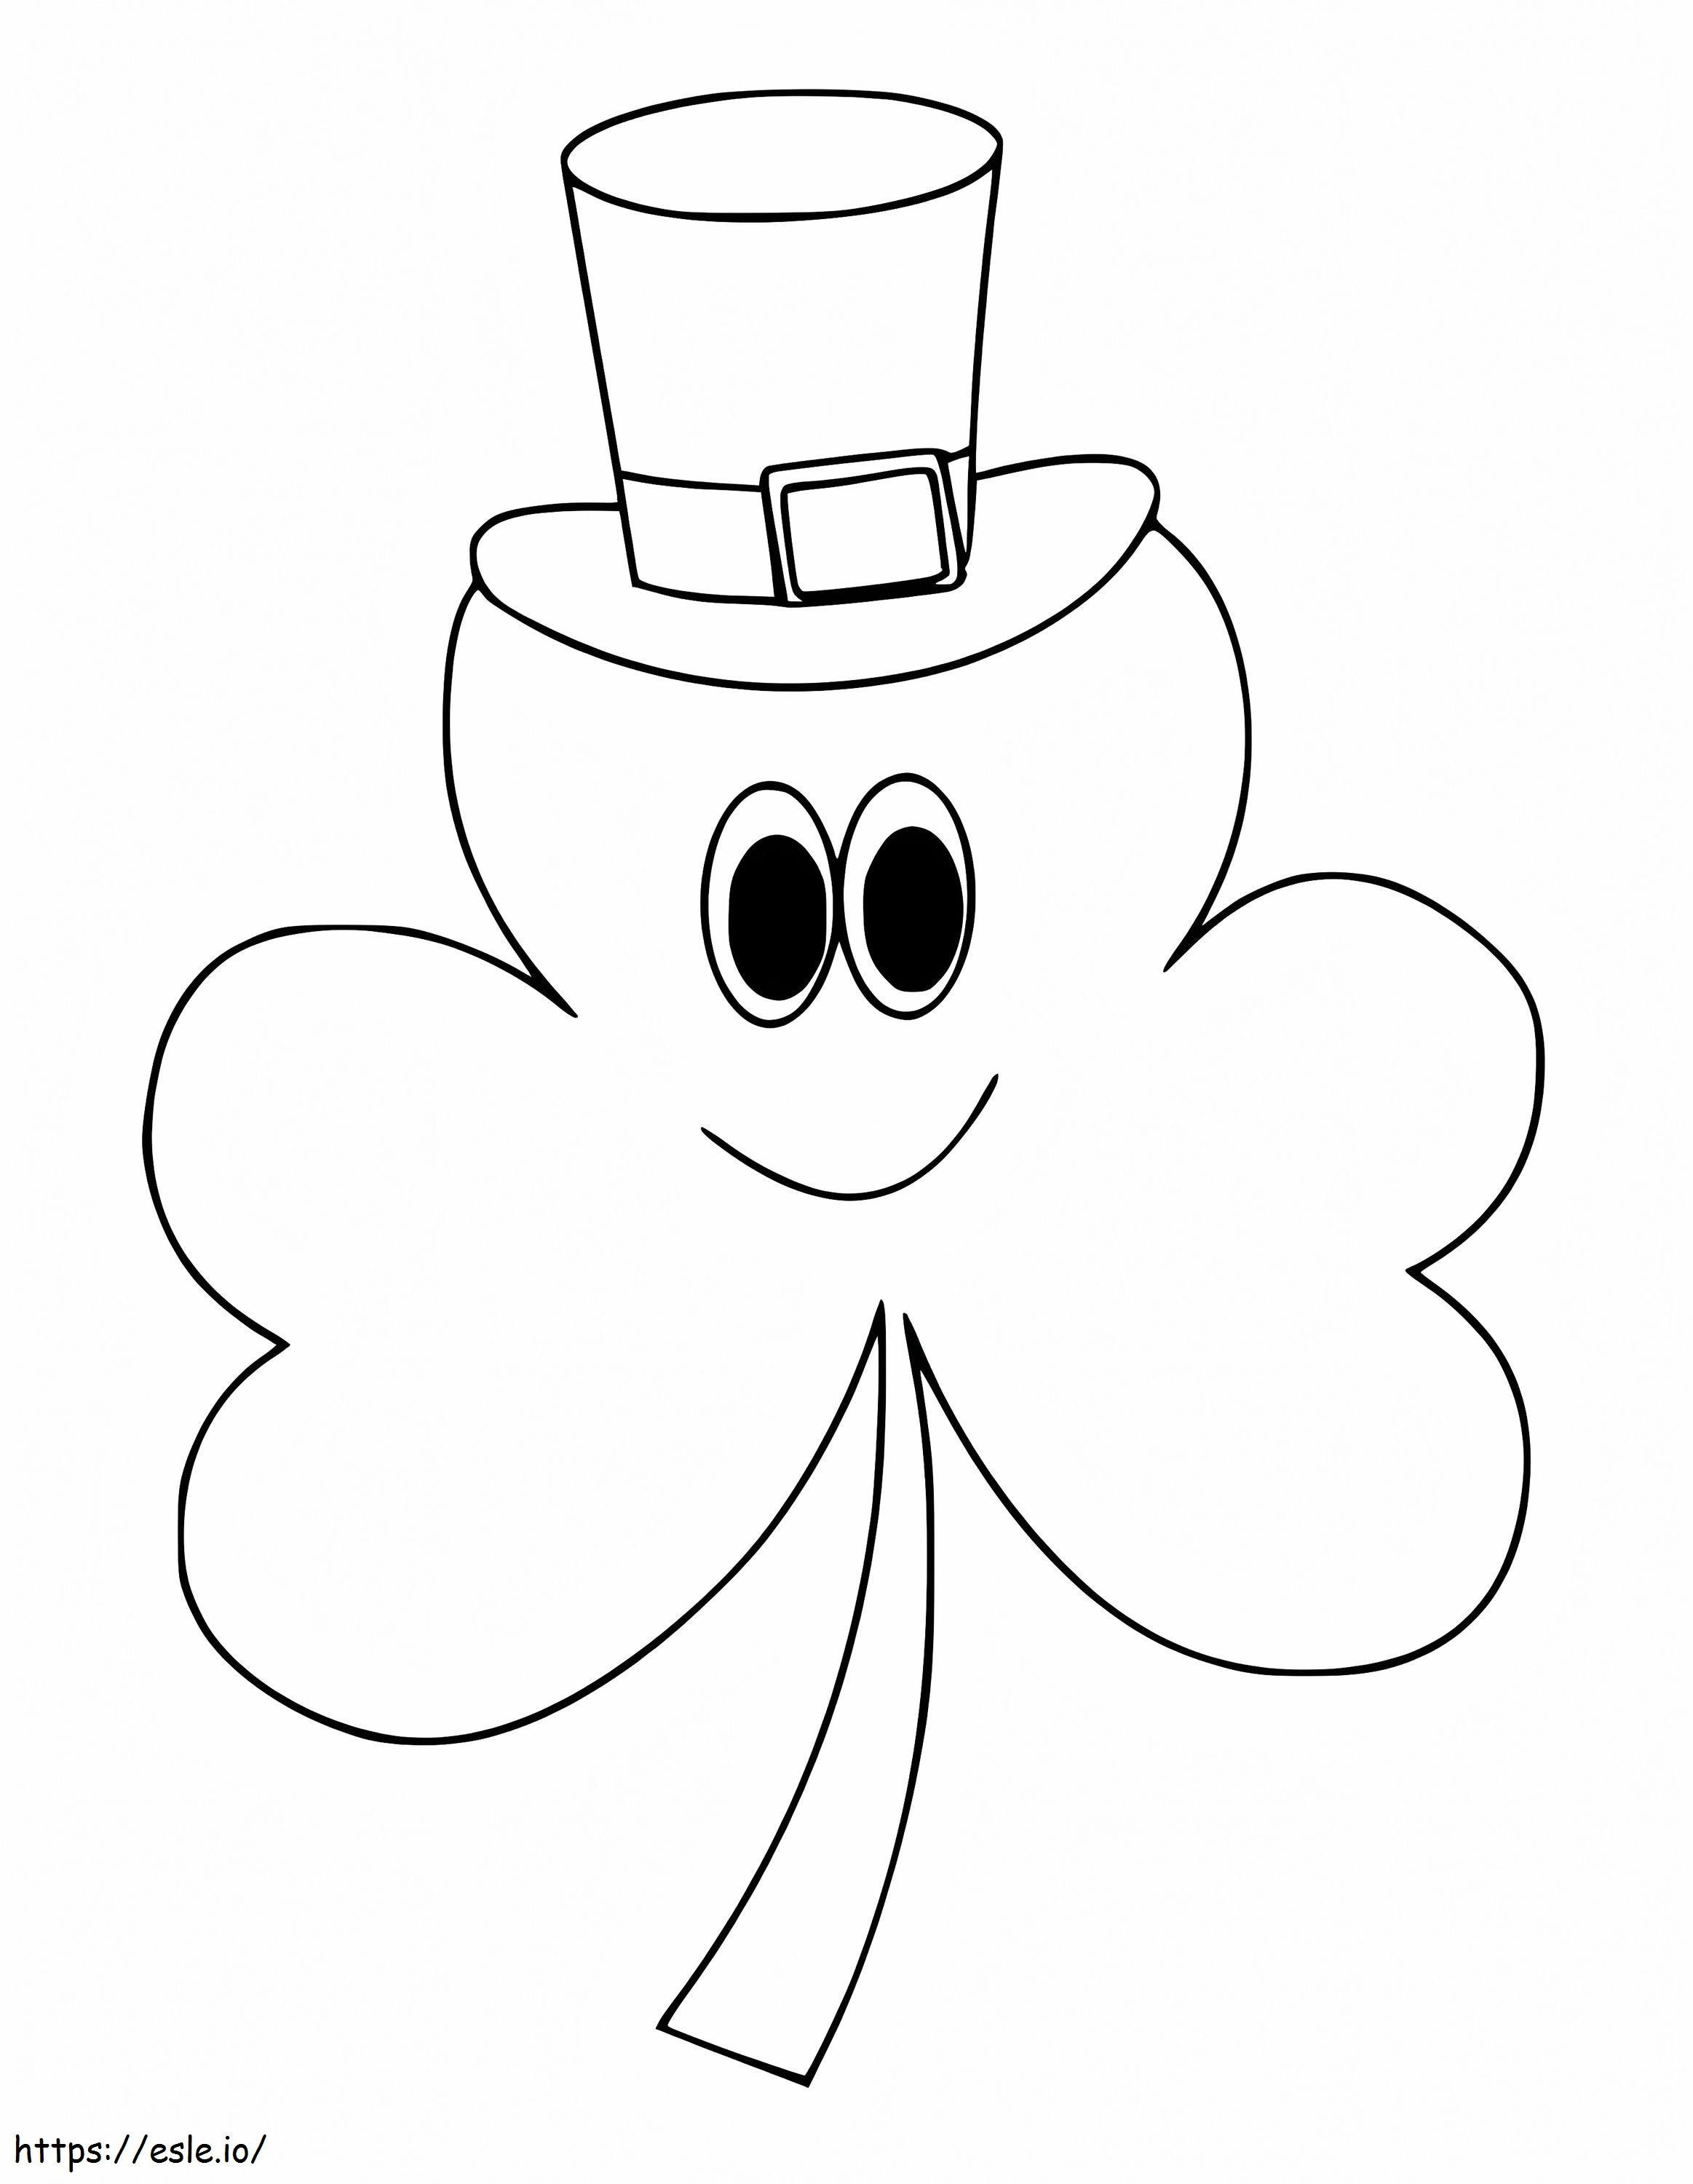 Cute Shamrock coloring page